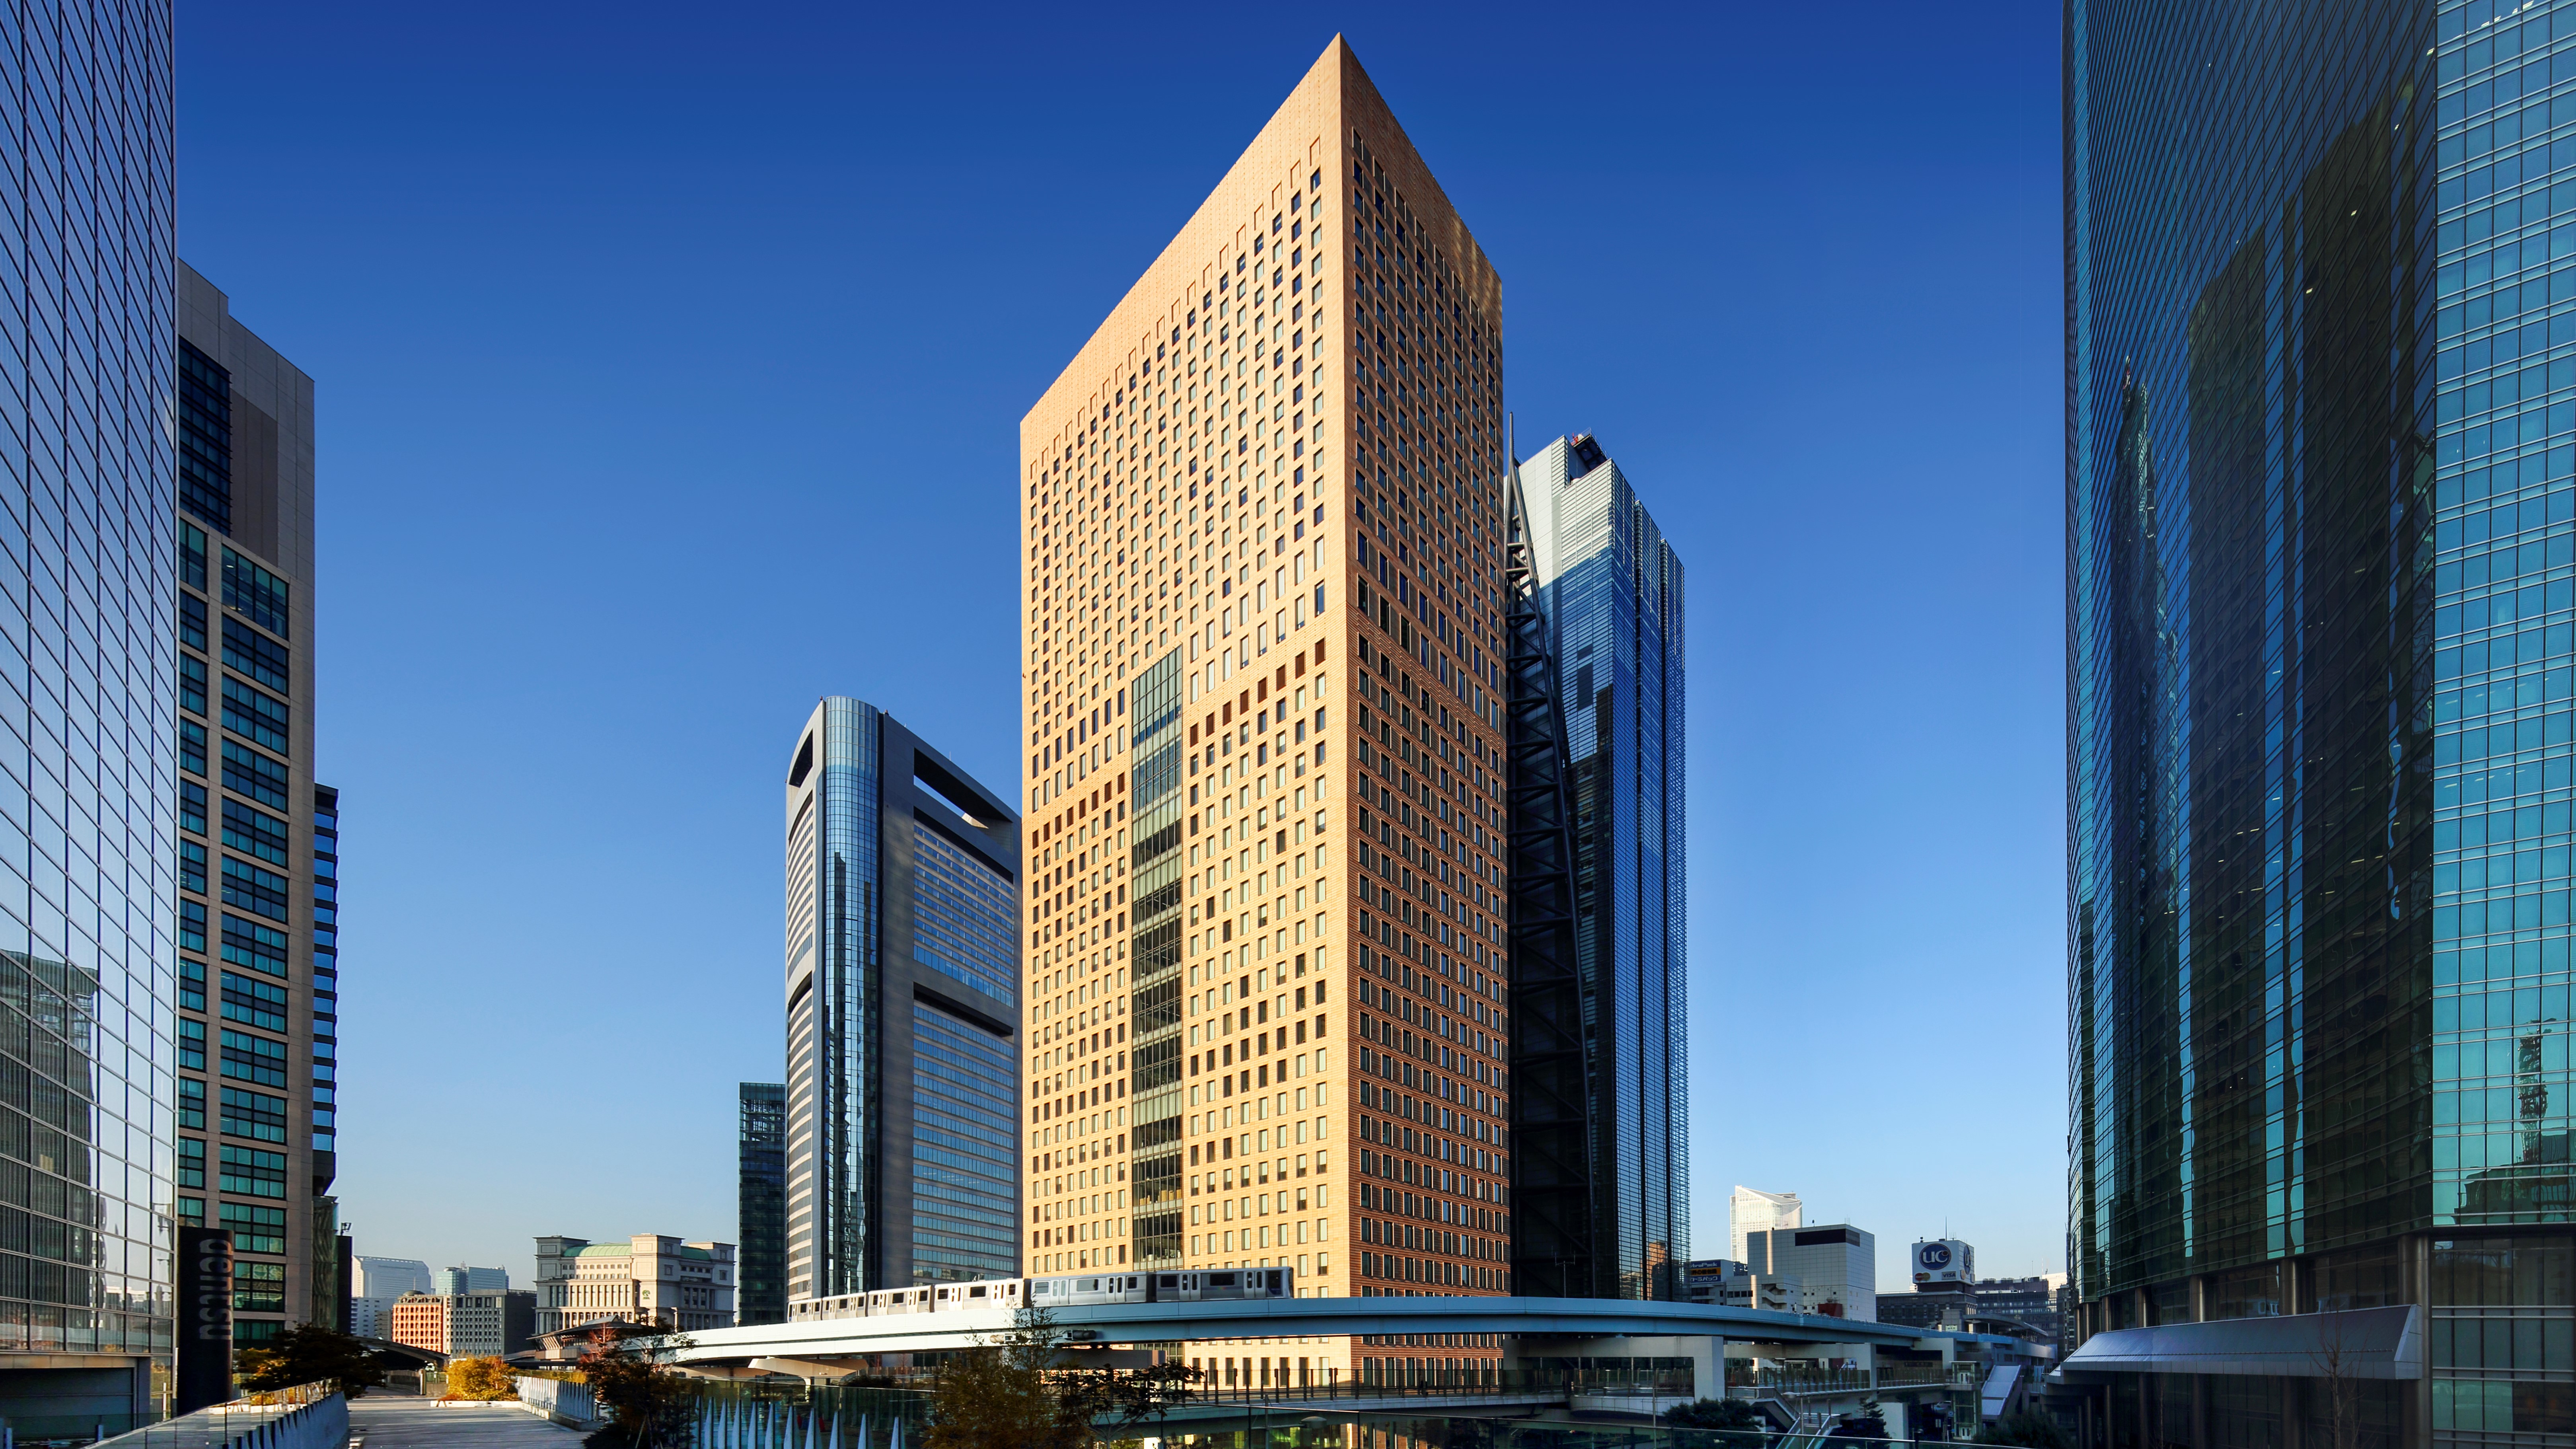 The Royal Park Hotel Iconic Tokyo Shiodome